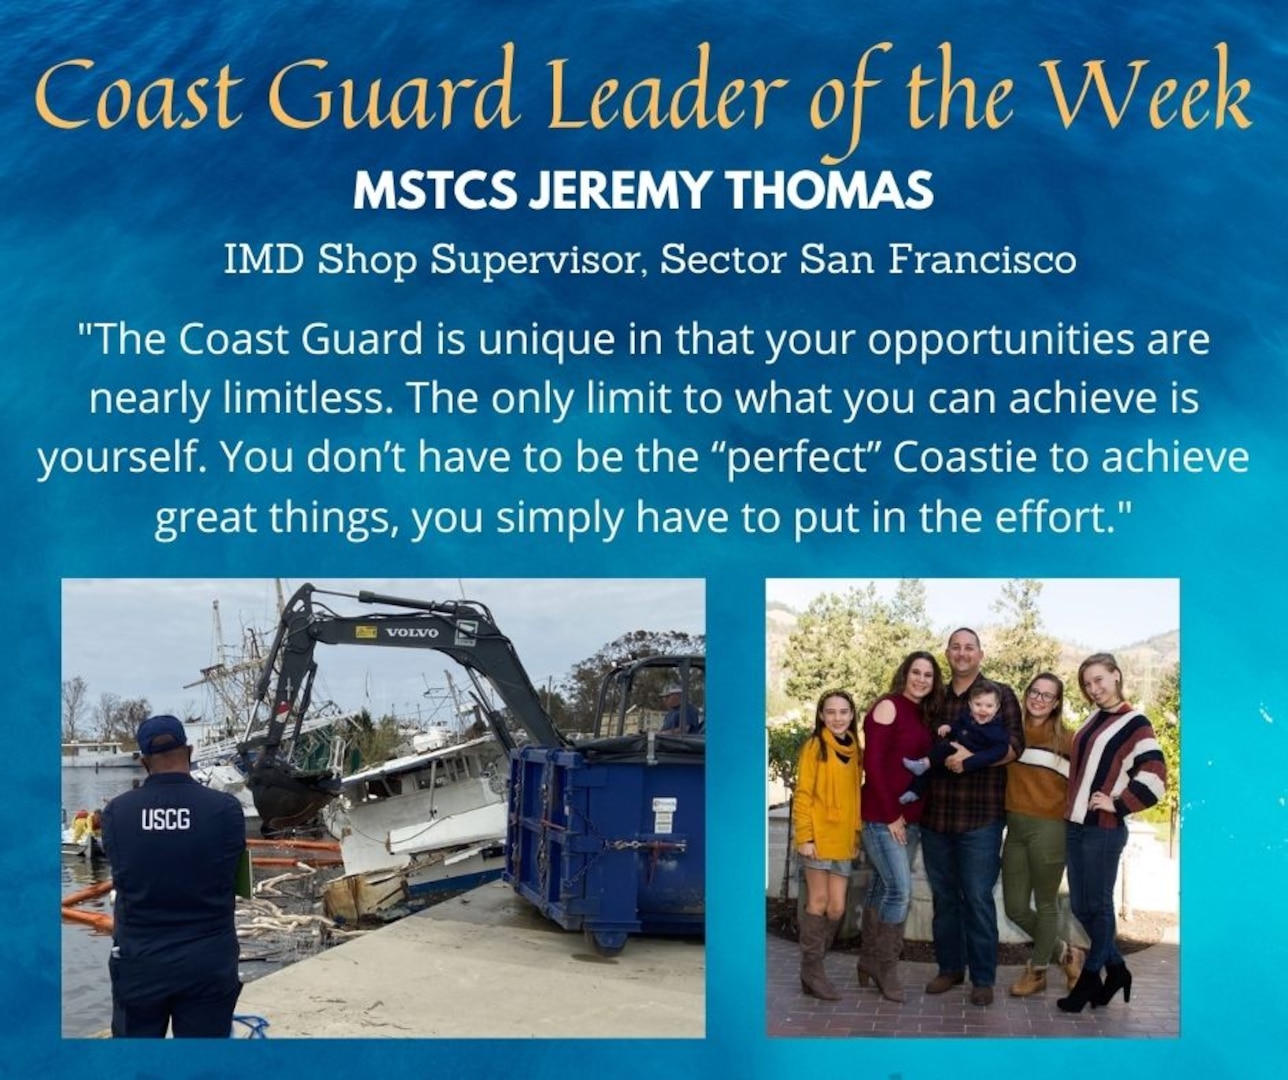 eckplate Leader of the Week is Senior Chief Petty Officer Jeremy Thomas, a marine science technician, from U.S. Coast Guard Sector San Francisco’s Incident Management Division!